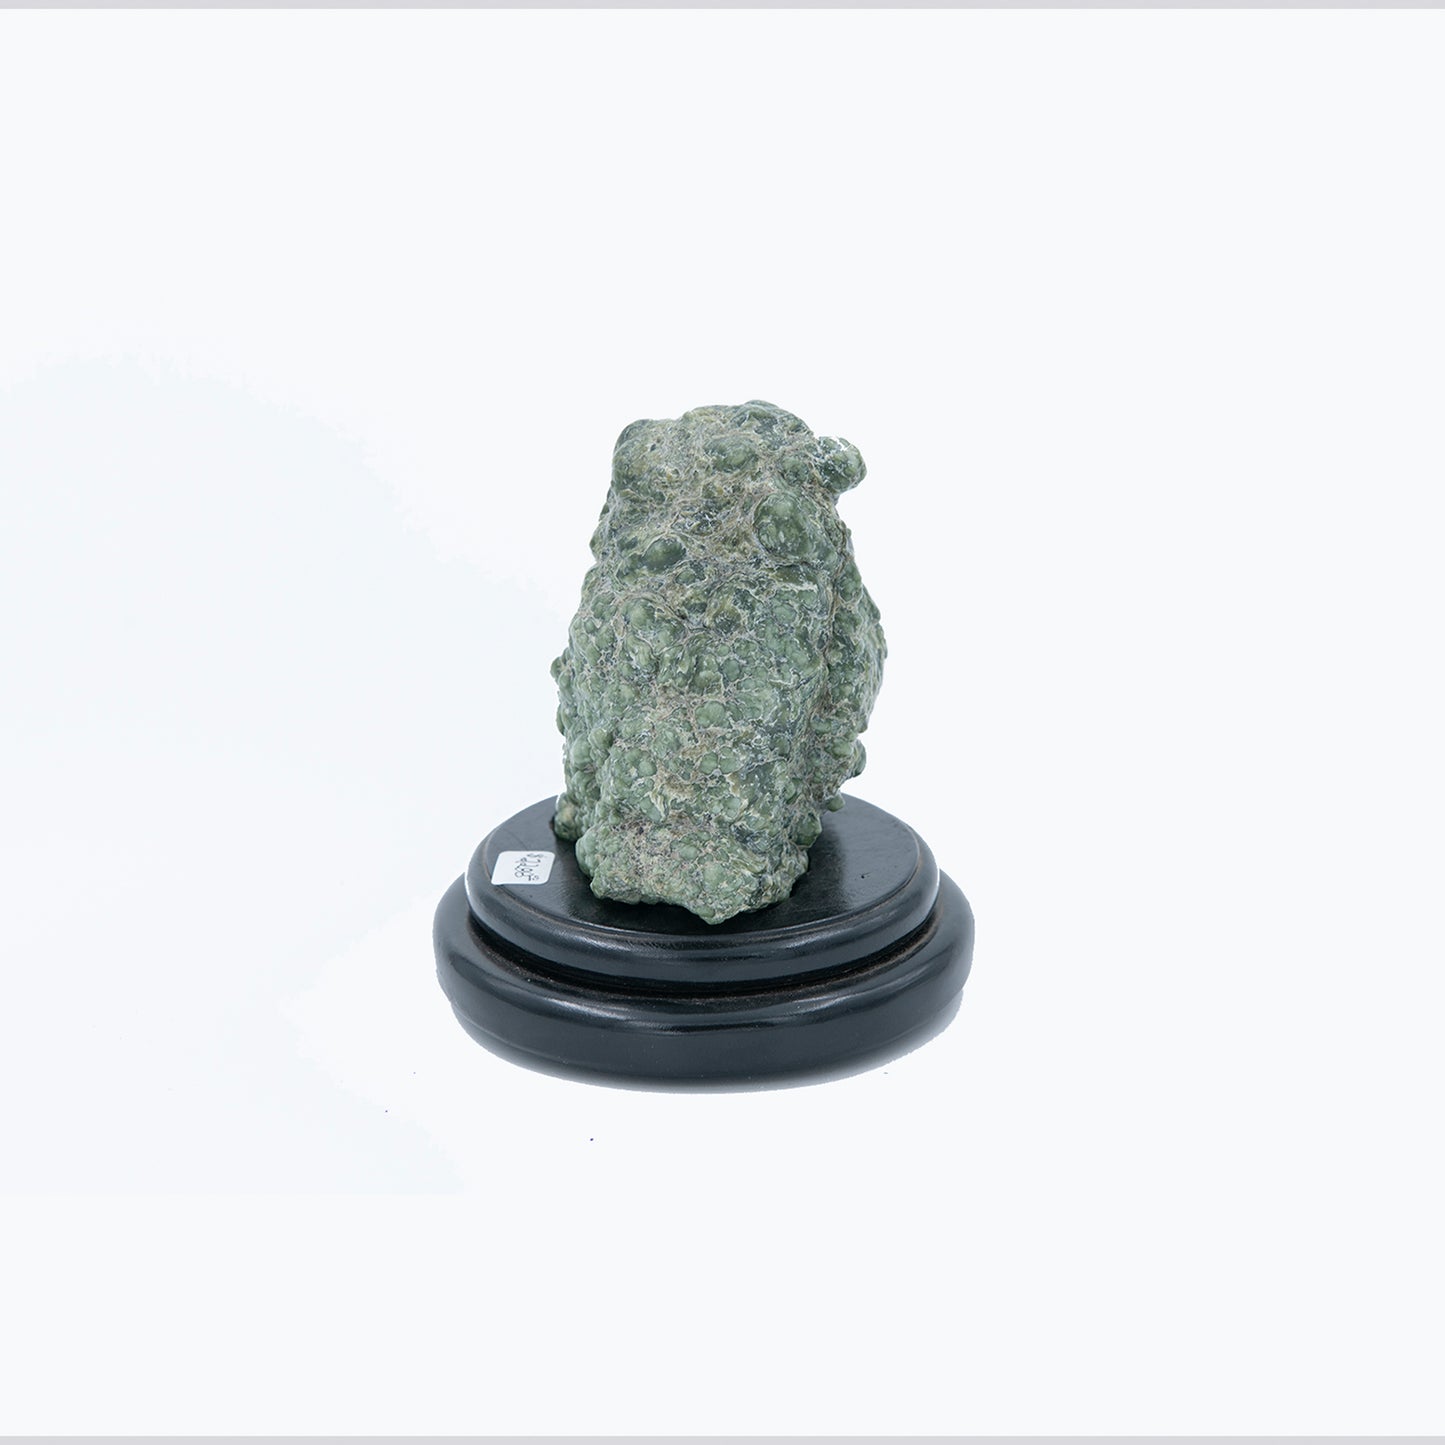 Mendocino California Botryoidal Jade Masterpiece.  Exquisite jade floater nugget.  Size of Jade stone is approx. 4x4x3 inches.  A floater Botryoidal Jade nugget is one that has no attachment to the jade body of the deposit and is extremely rare.